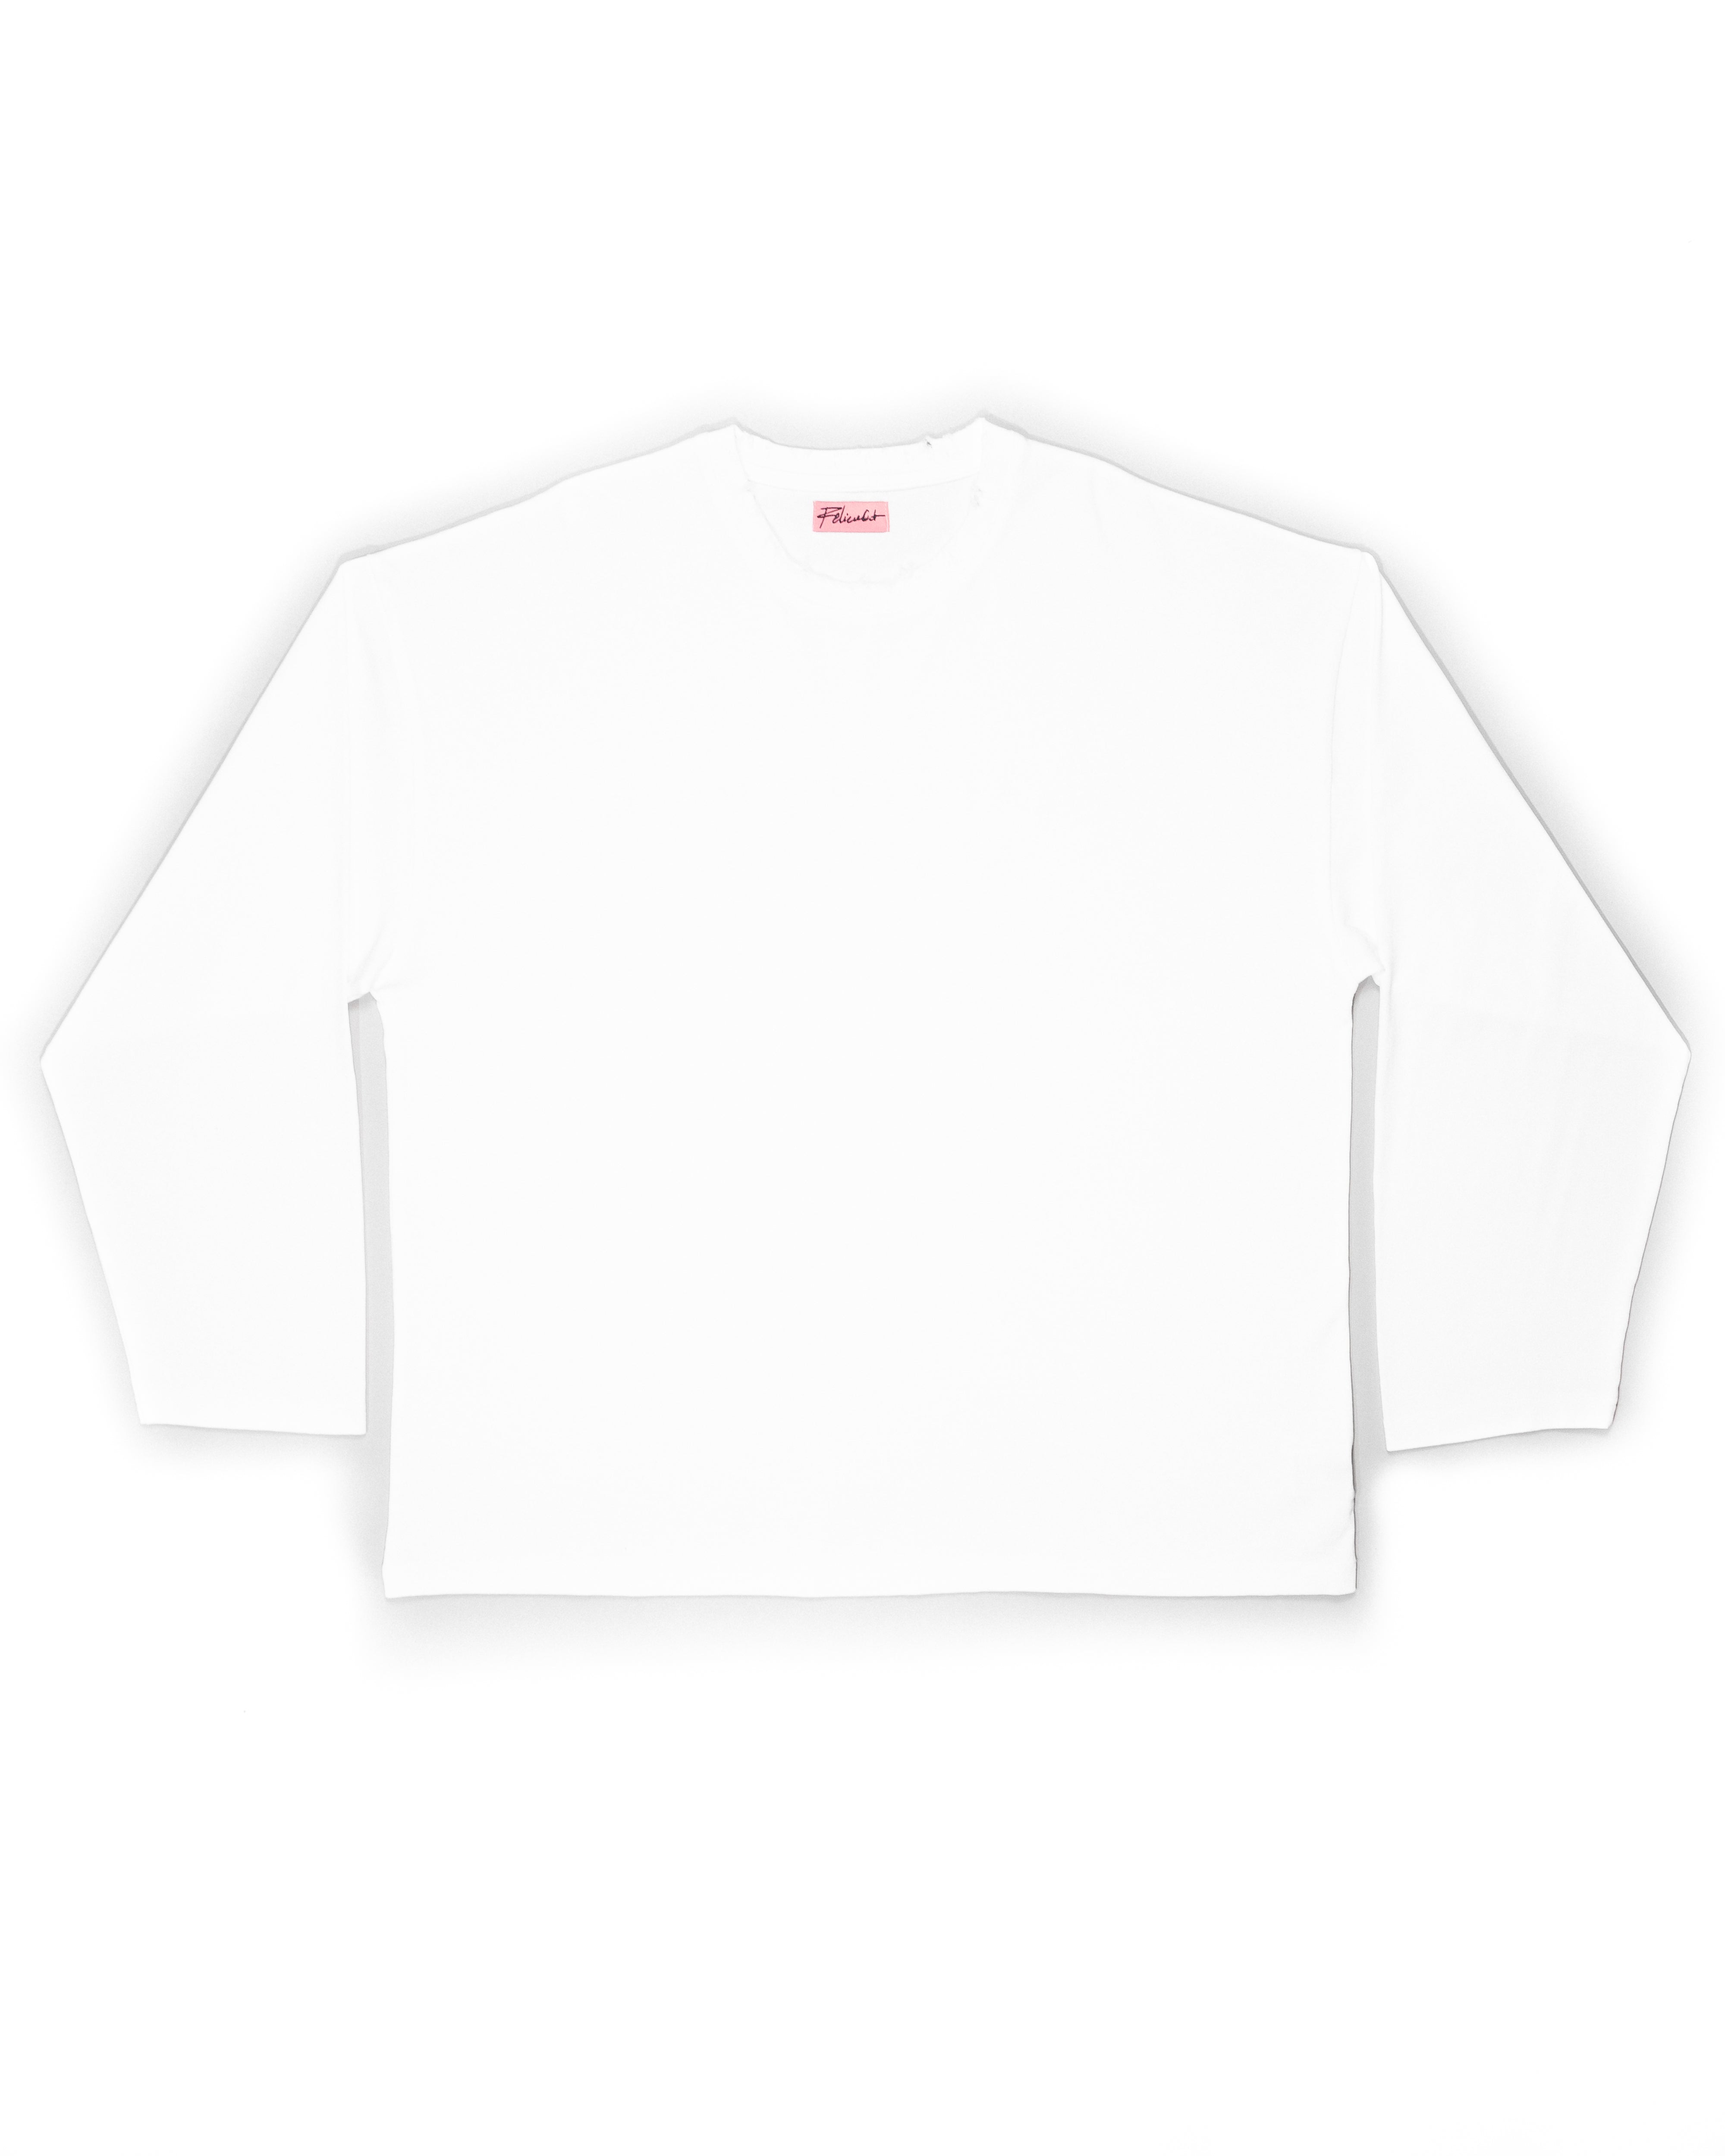 DISTRESSED THAT SOFT PINK  MATTERS LONGSLEEVE